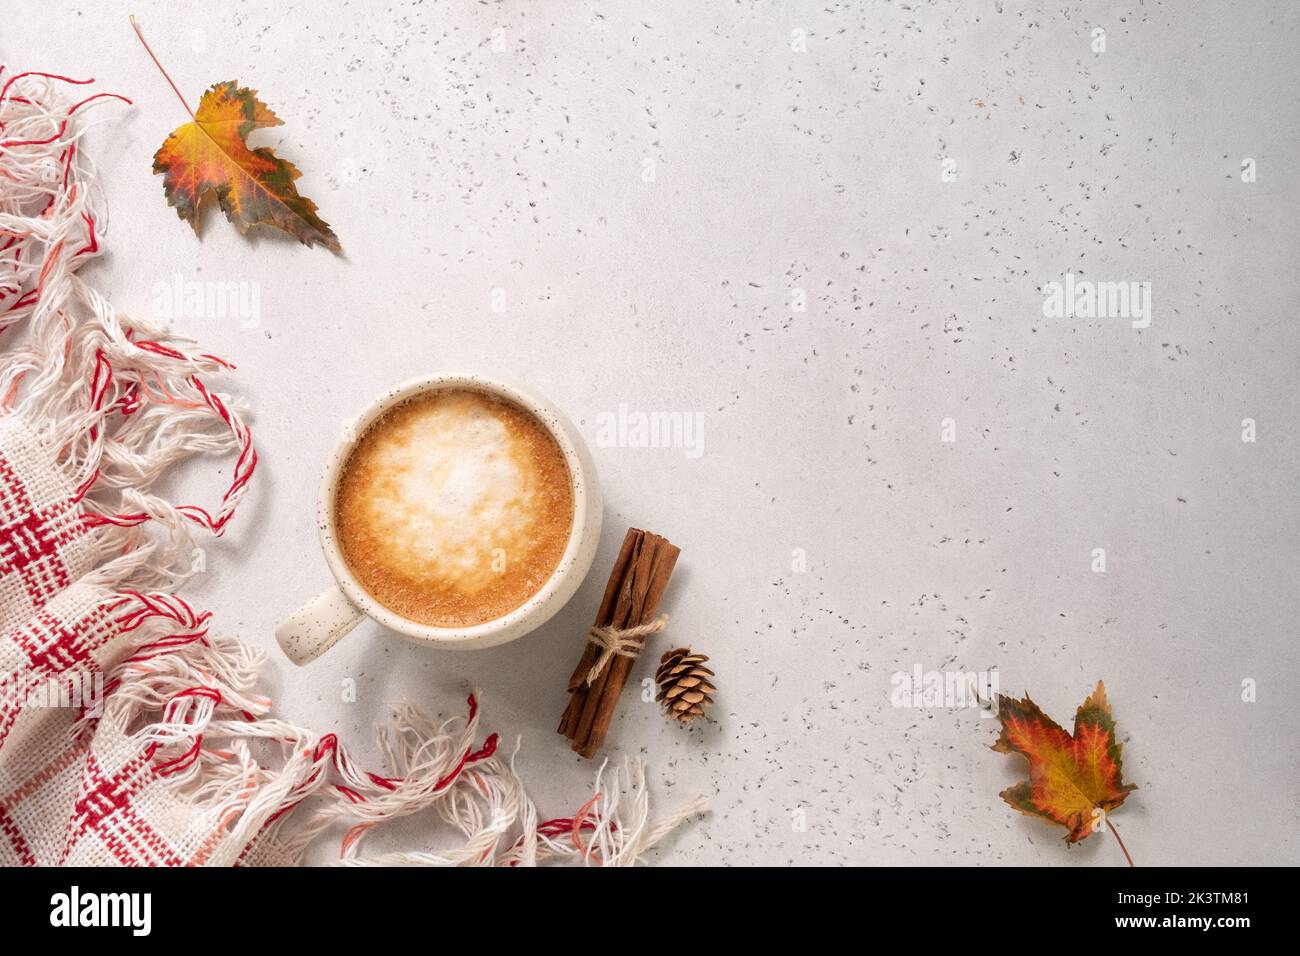 Autumn composition. Cup of coffee, blanket, autumn leaves, cinnamon sticks on white background. Flat lay, top view. Stock Photo